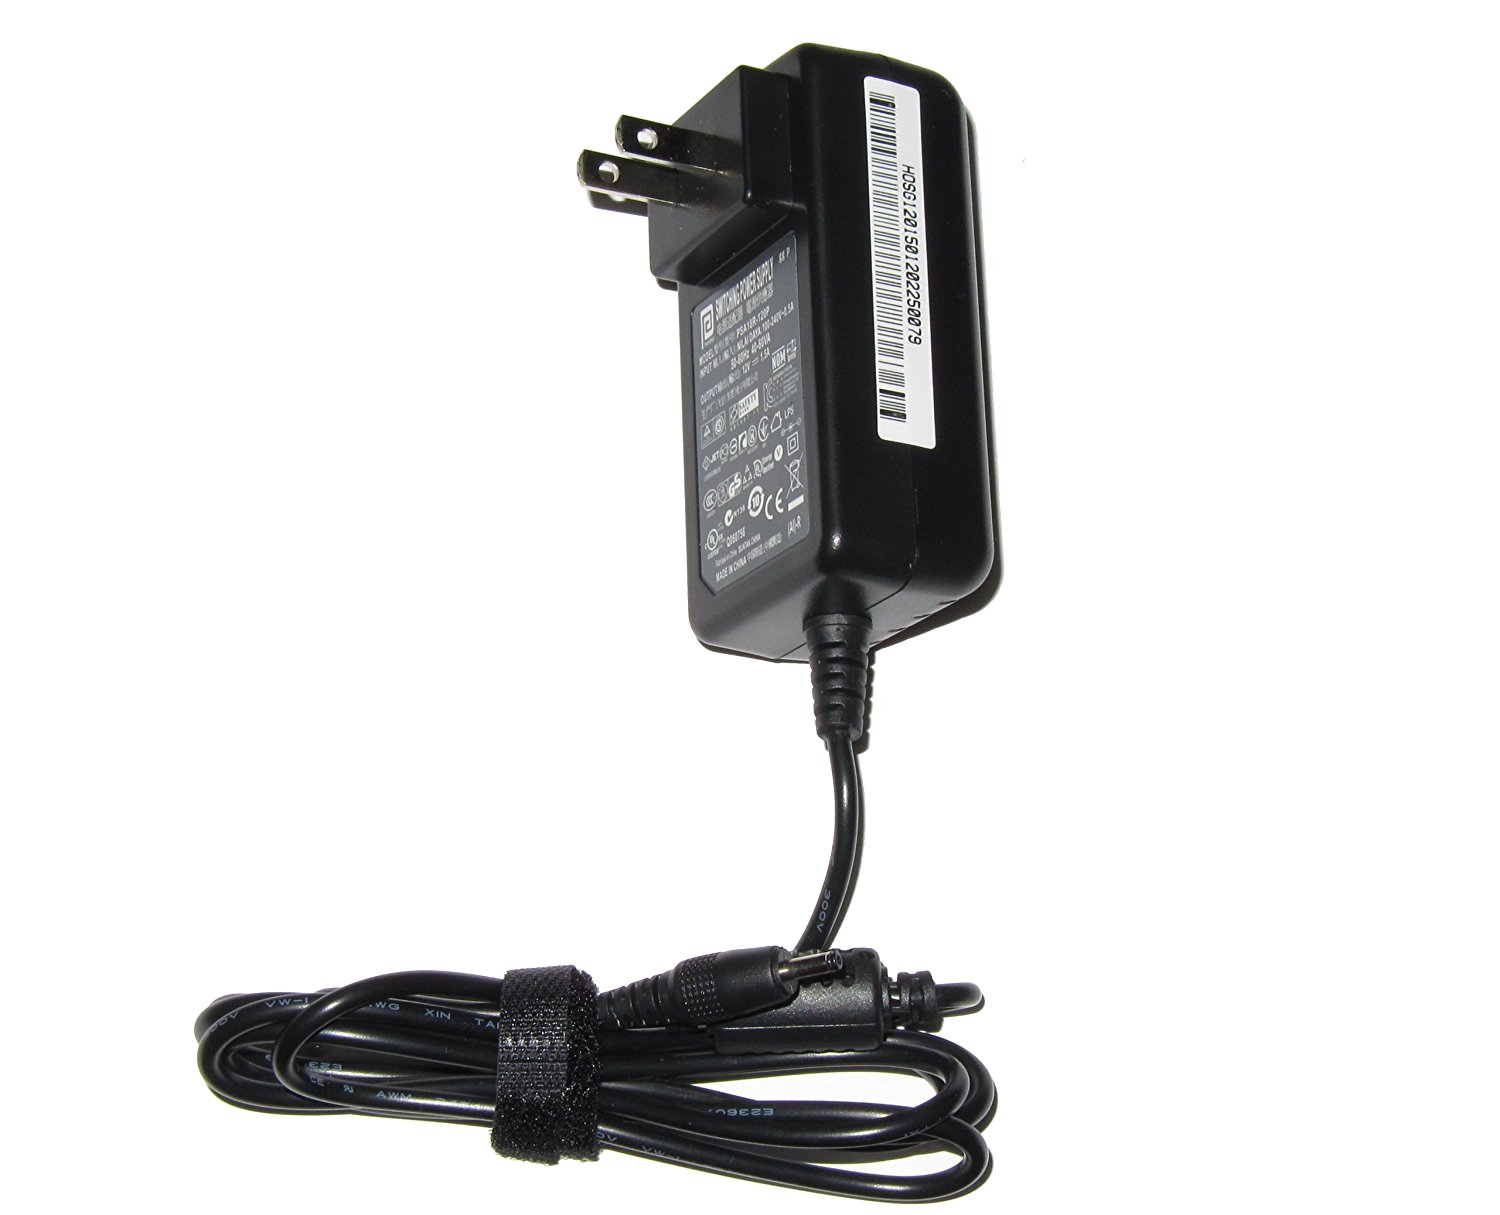 AC POWER ADAPTER PSA18R-120P FOR ACER ICONIA TAB TABLET A200-10G16U,XE.H8QPN.001,A200-10r08U,XE.H8WPN.002,A200-10R16U,XE.H8XPN.003,A500-08S08U,XE.H8RPN.005